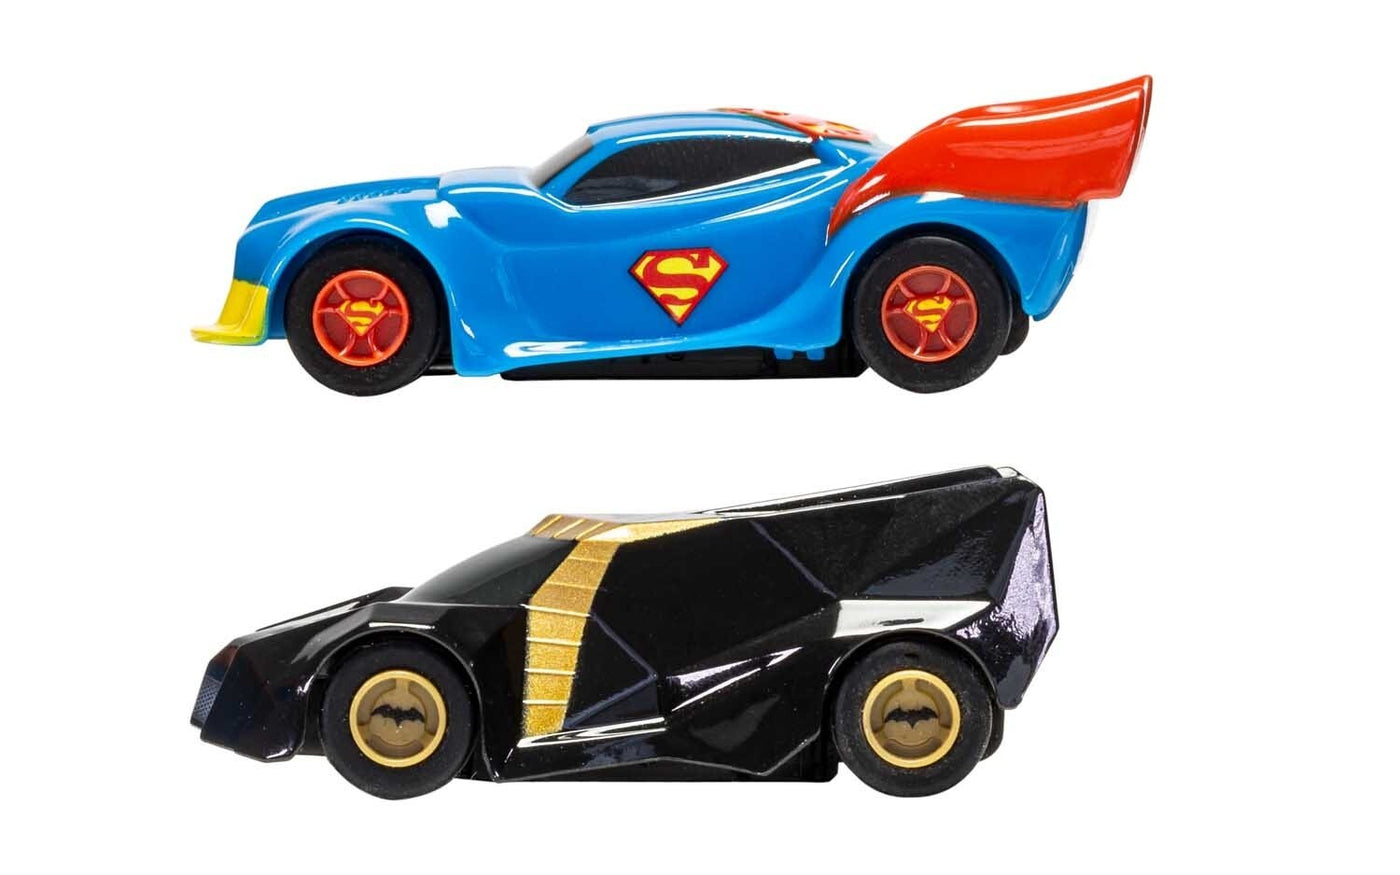 Scalextric - Justice League Set (Micro Scalextric)